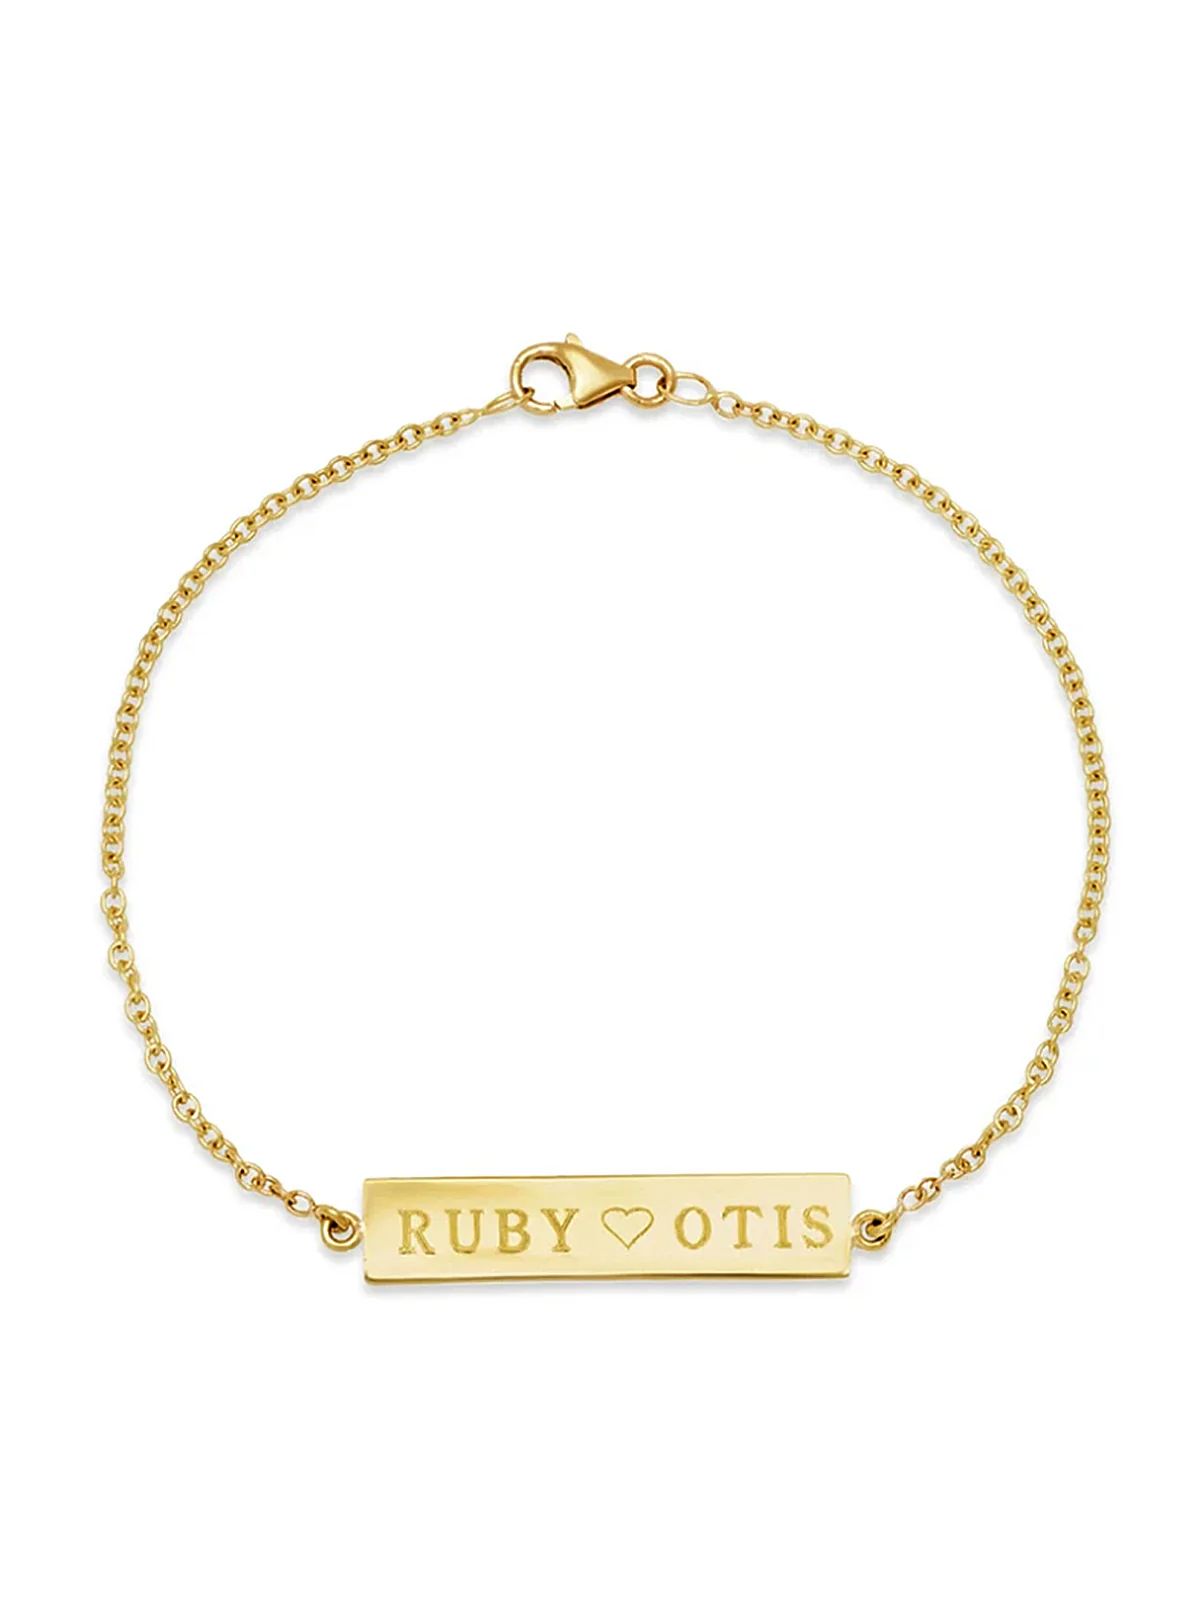 Personalized Nameplate Yellow Gold Bracelet | YLANG 23